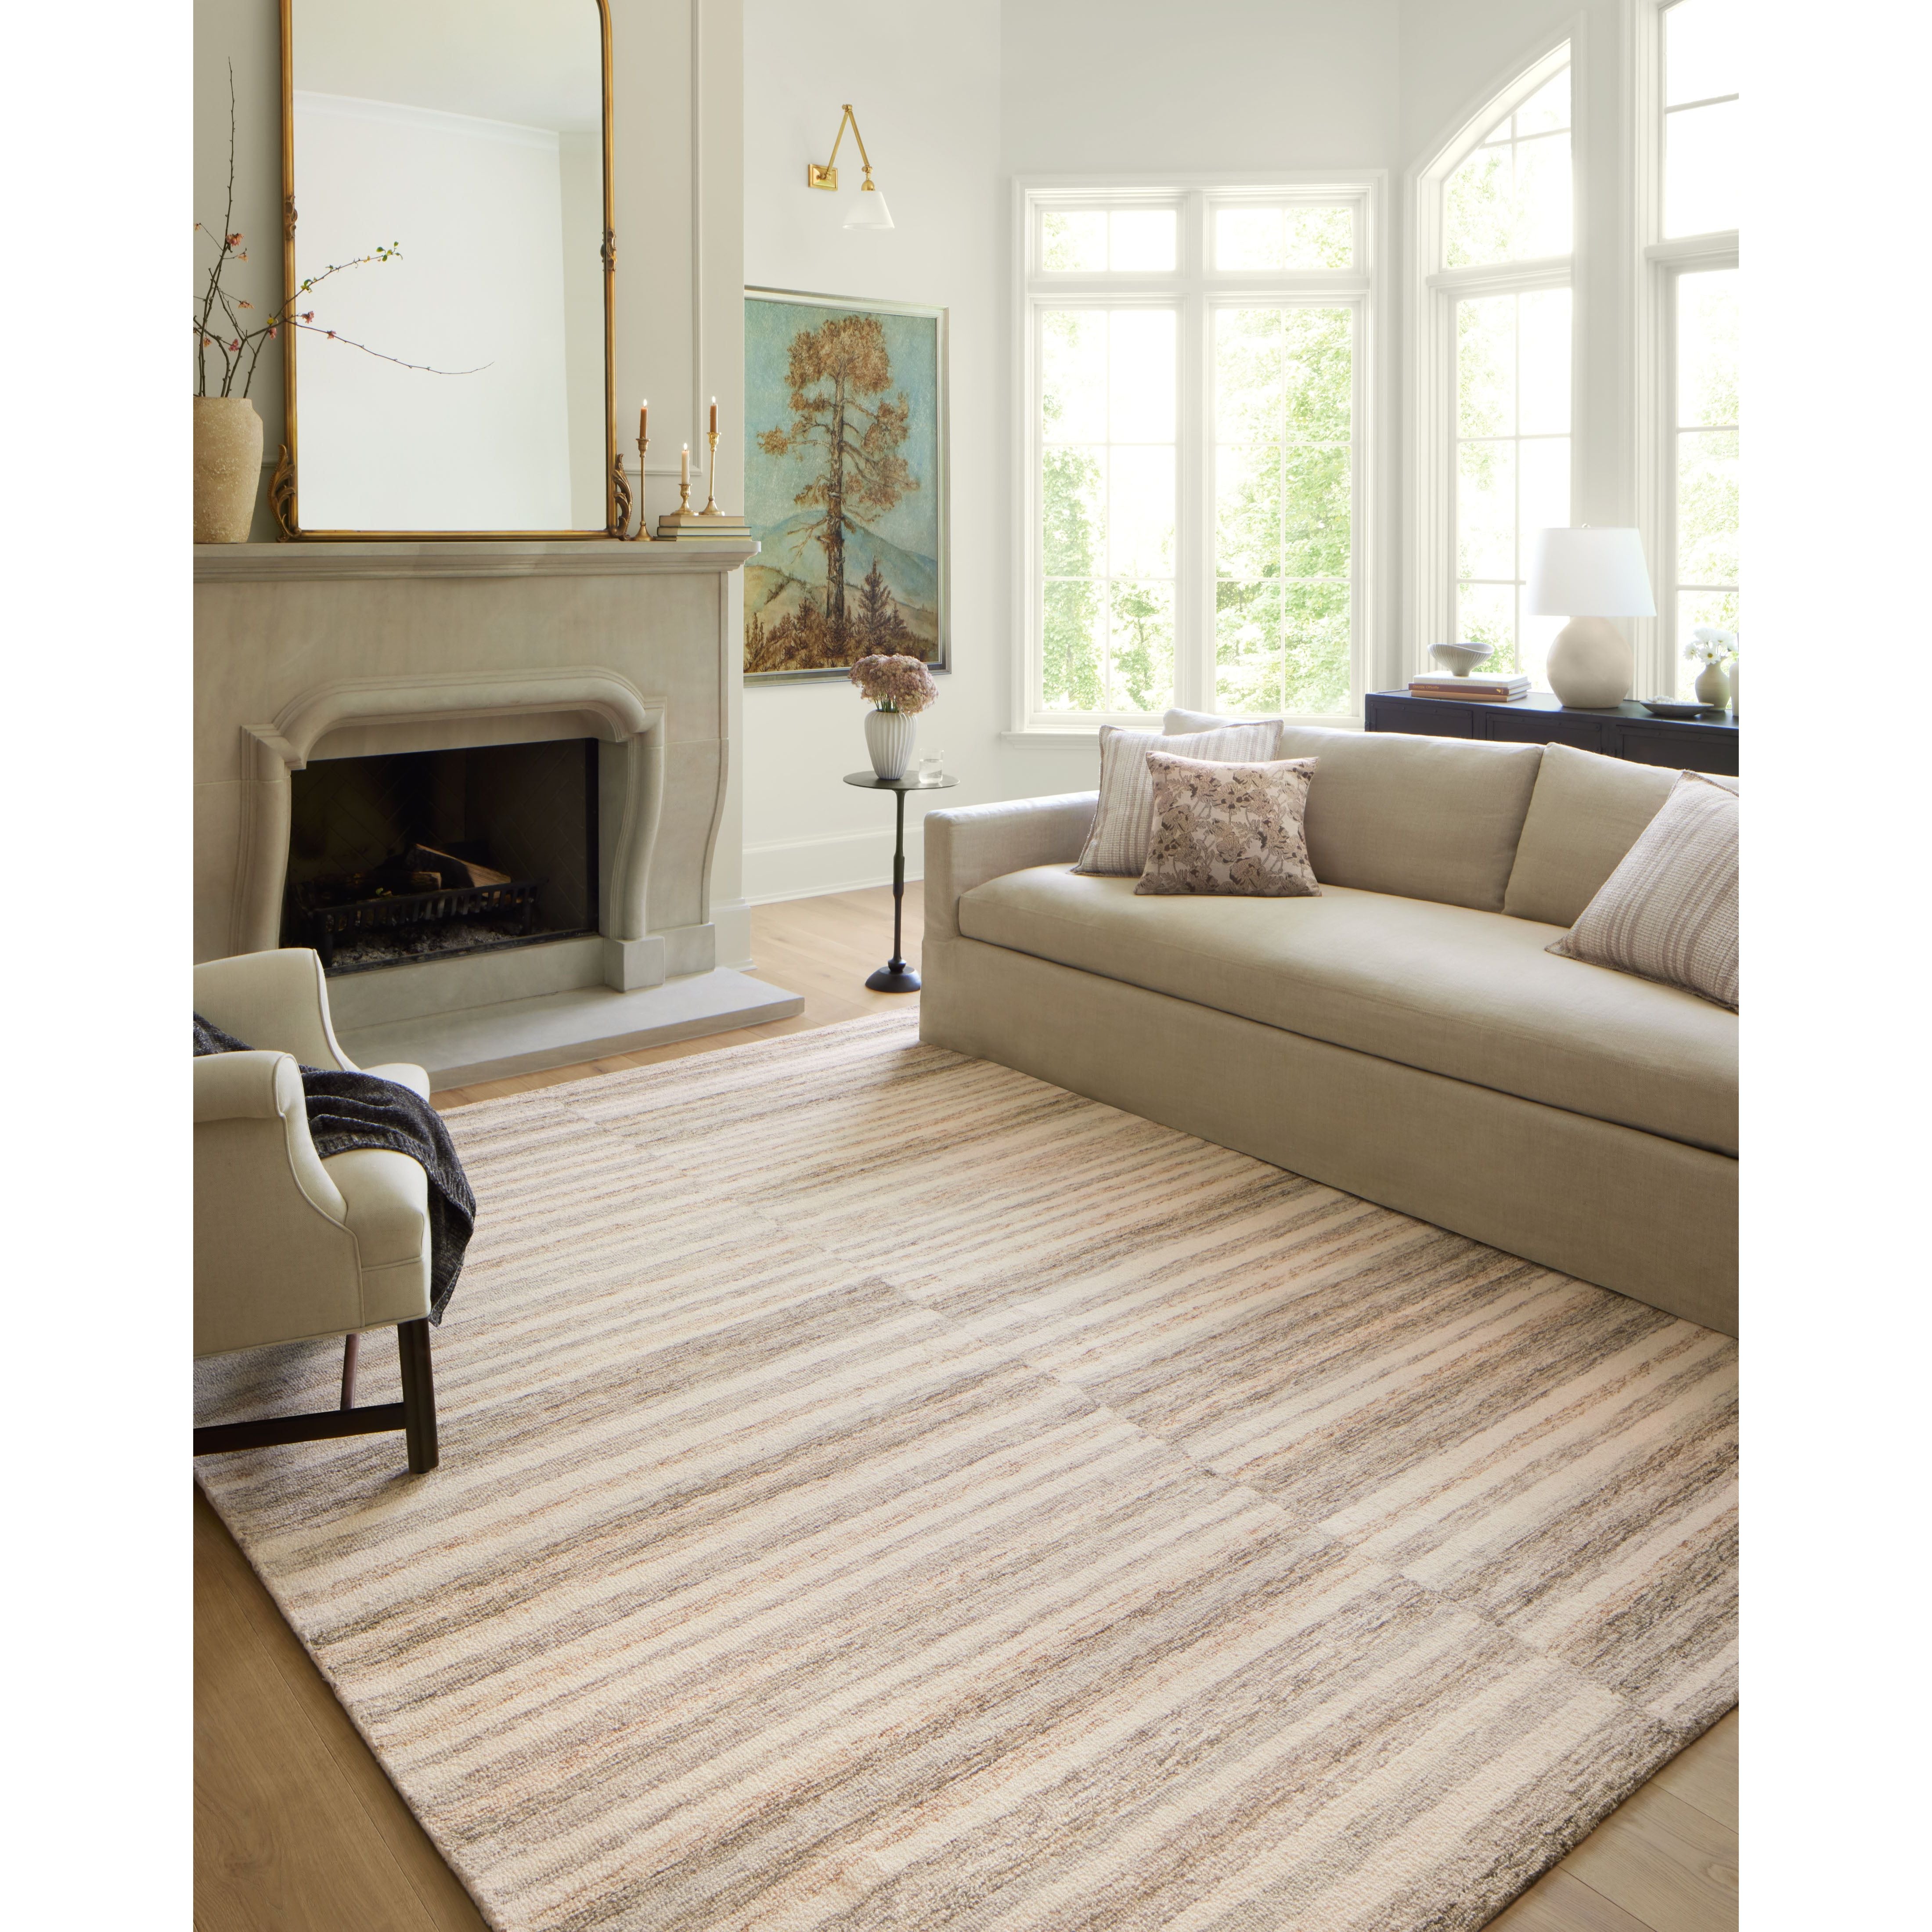 The subtle, warm tonal patterns remind us of our favorite California cool hemp rugs. Known for its durability, the Chris Ivory / Clay hooked wool rug is a smart choice for any room in your home that gets lots of love. Amethyst Home provides interior design services, furniture, rugs, and lighting in the Omaha metro area.